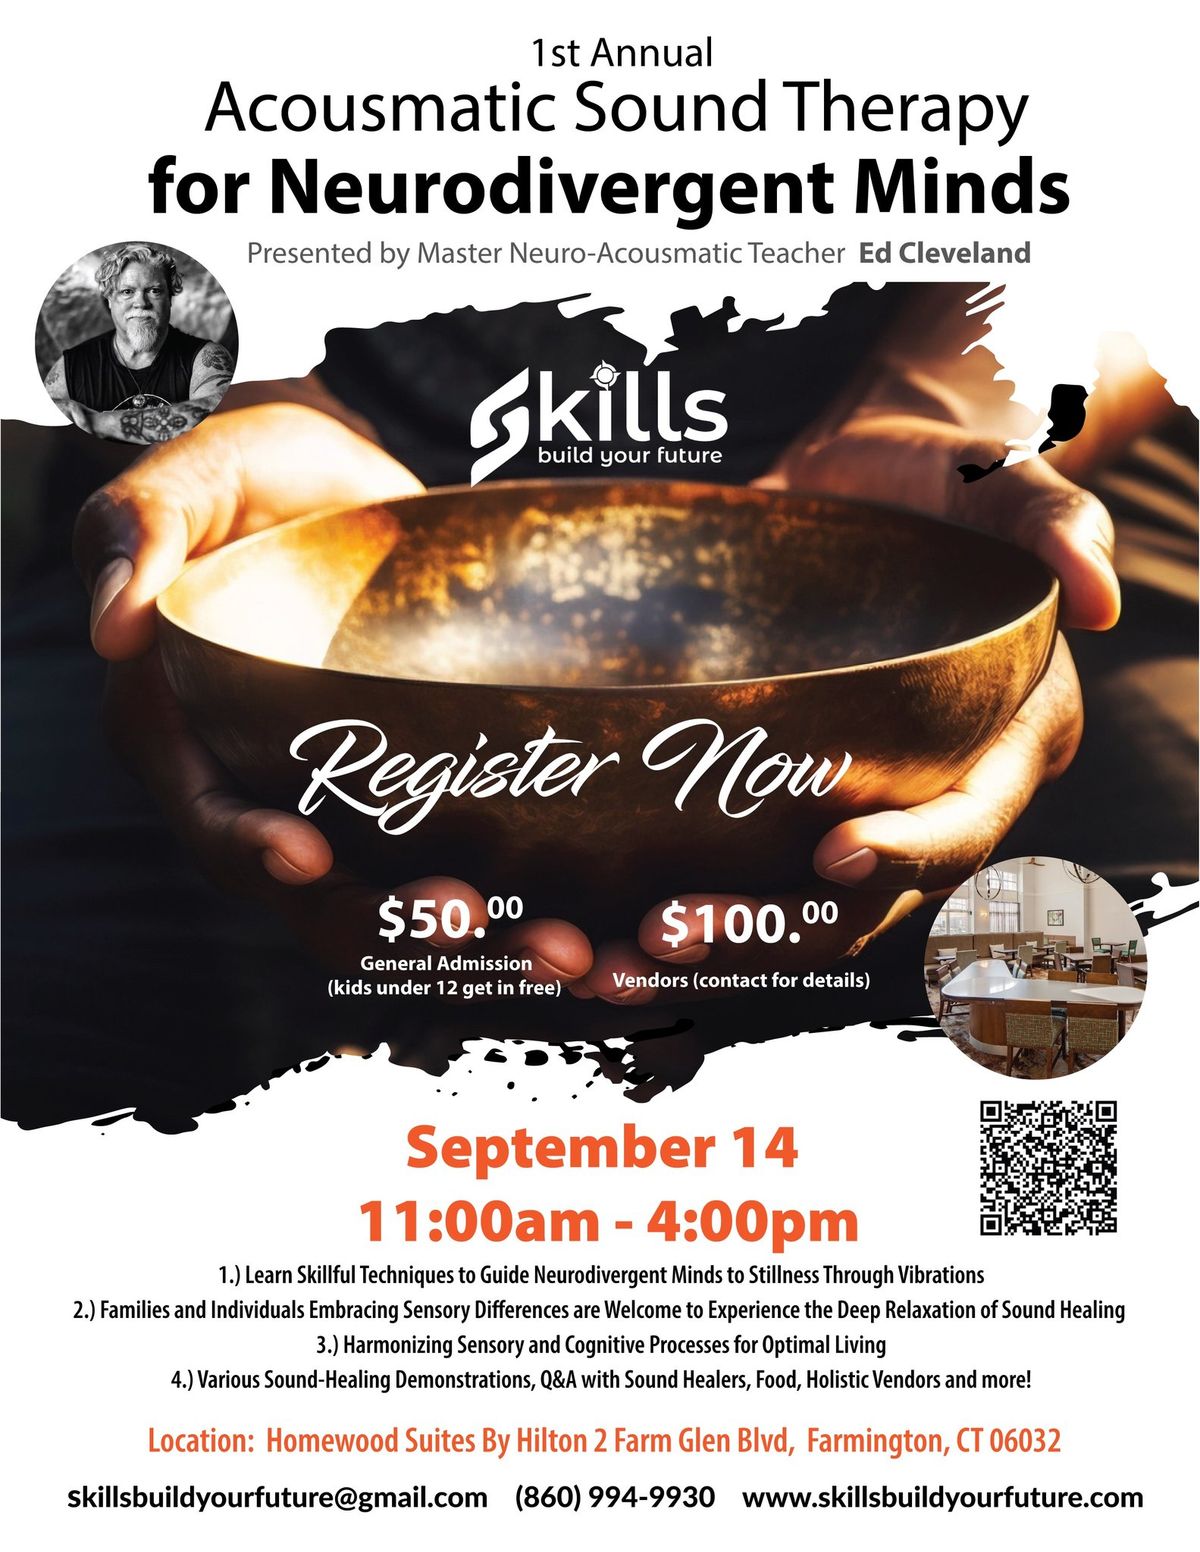 1st Annual Acousmatic Sound Therapy for Neurodivergent Minds